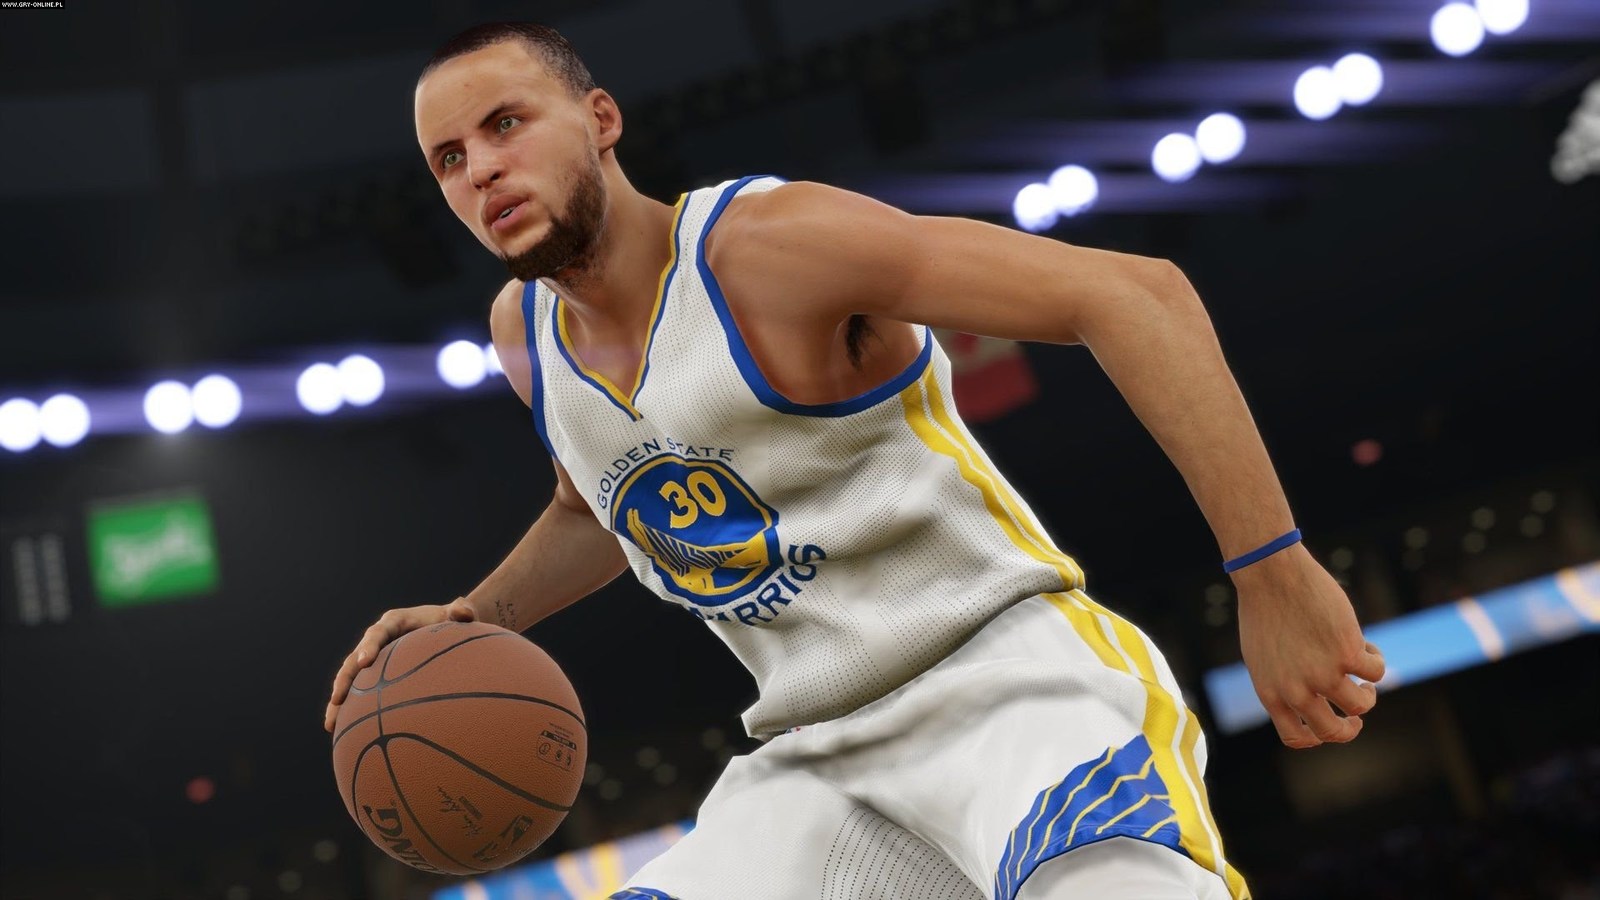 Nba 2k17 Legend Edition For Ps4 Image - Nba 2k17 Ps3 Curry , HD Wallpaper & Backgrounds